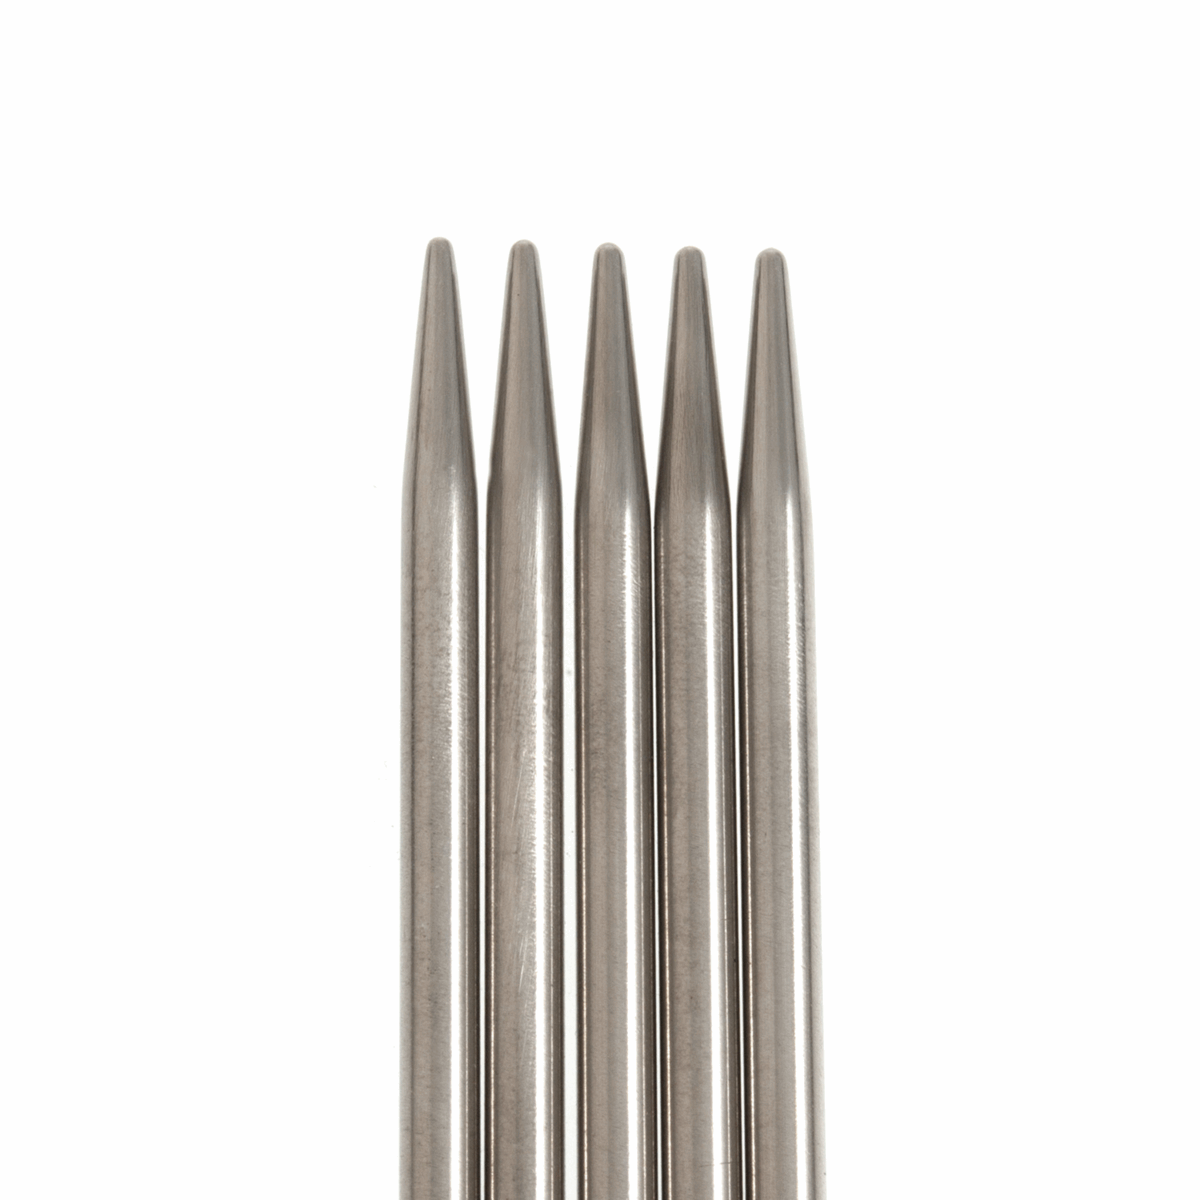 PONY 'Elan' Double-Ended Stainless Steel Knitting Pins - 20cm x 3.75mm (Set of 5)